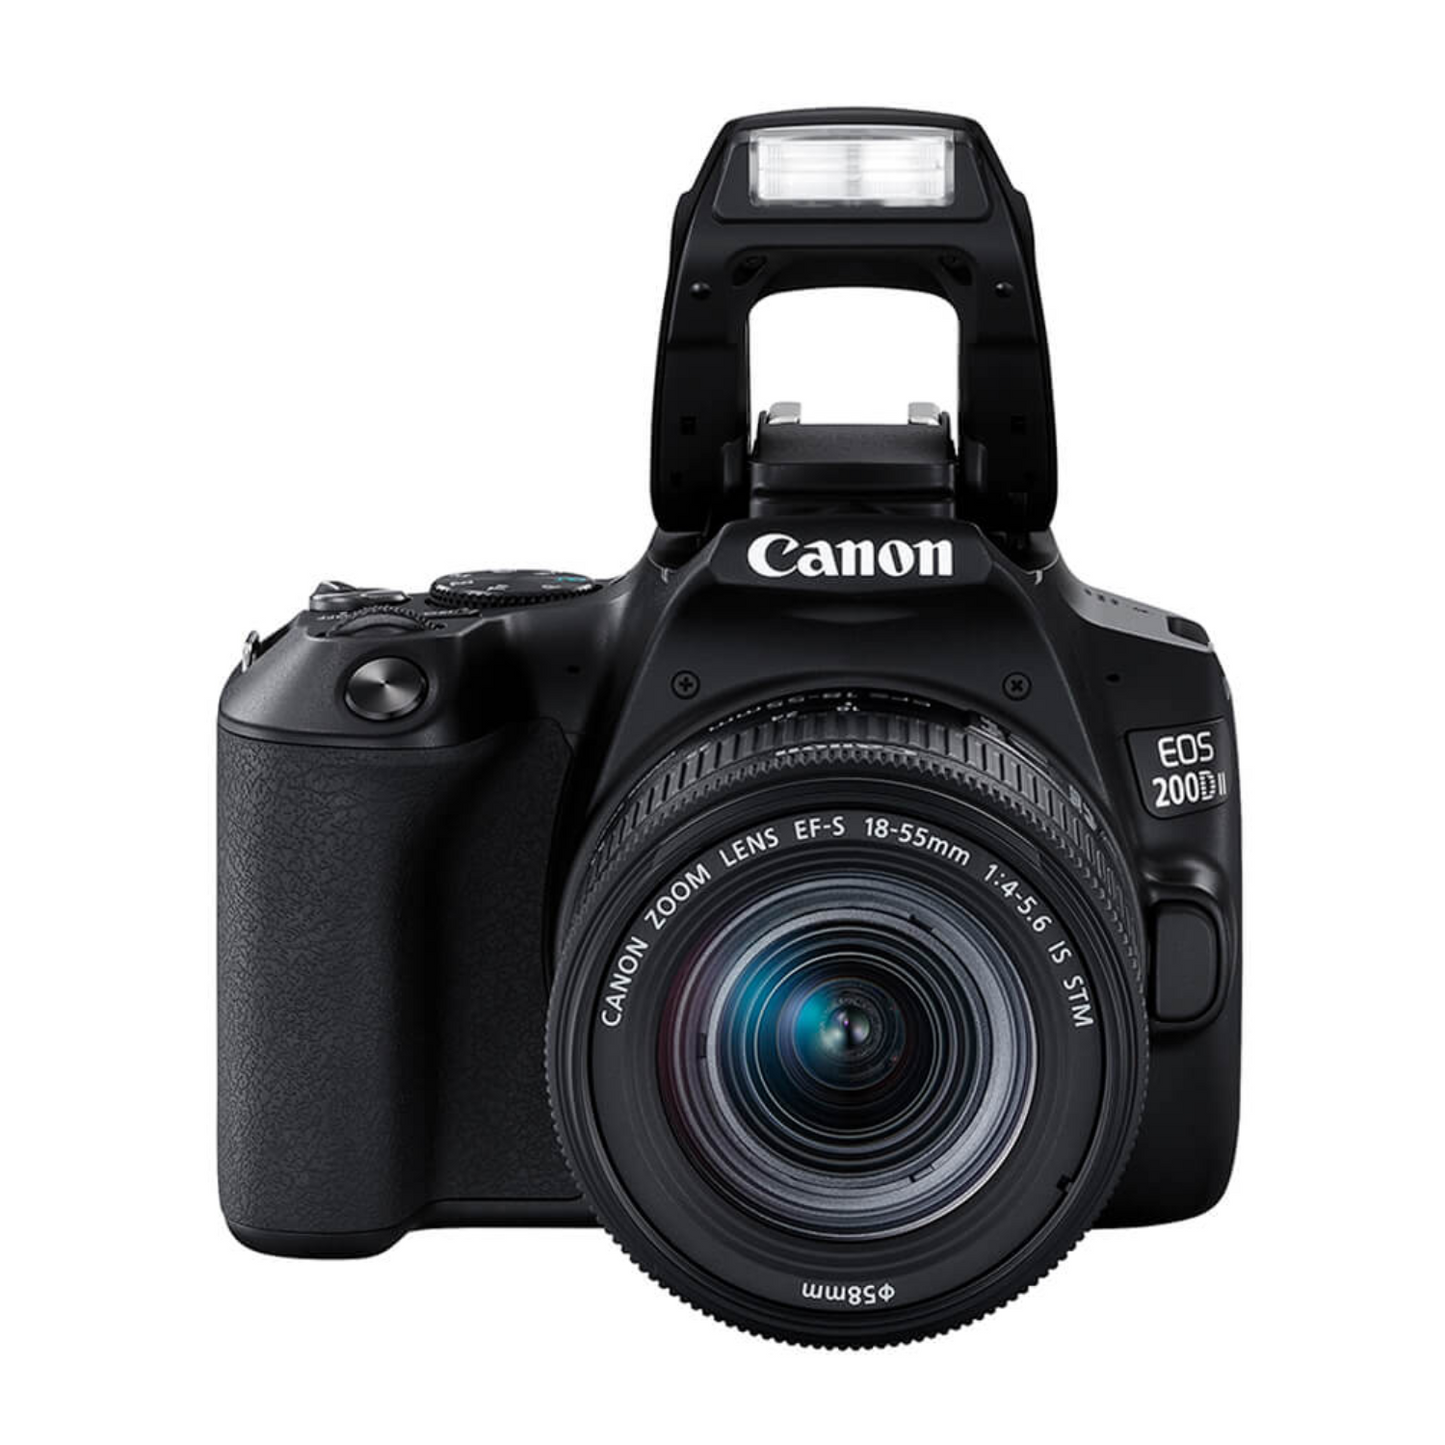 Canon EOS 200D II DSLR Camera with 18-55mm Lens Kit, Black